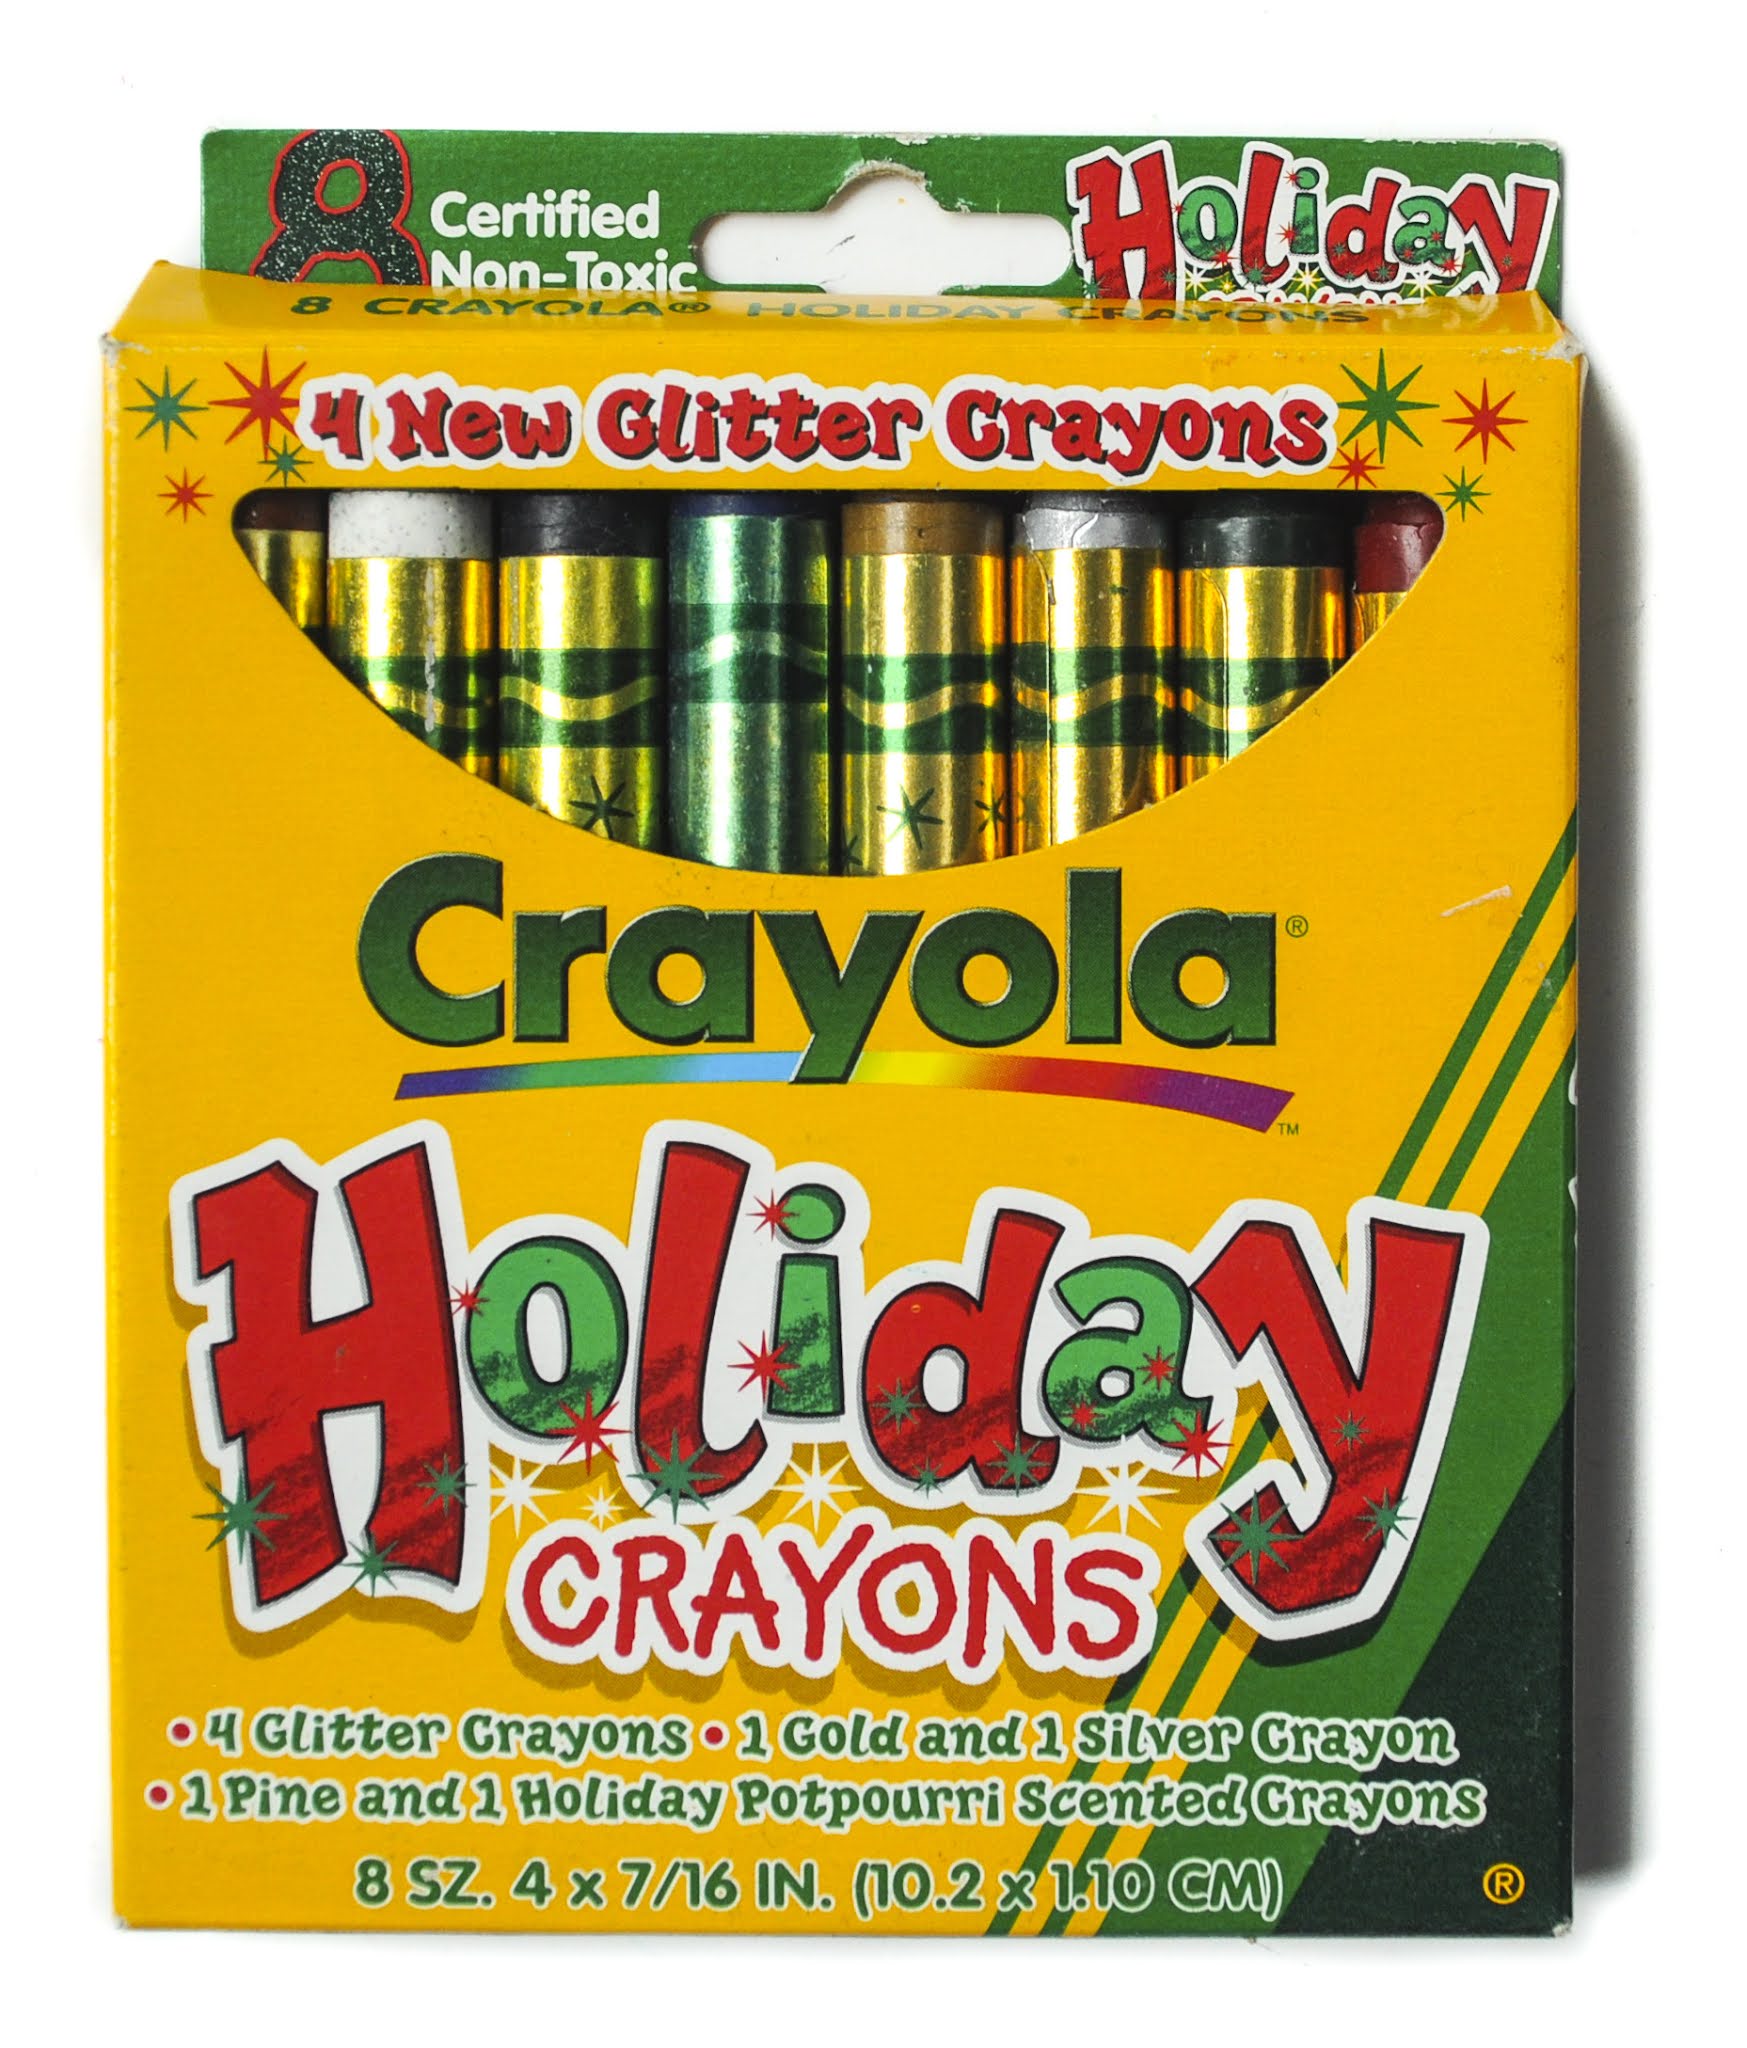 8 Count Crayola Triangular Crayons: What's Inside the Box